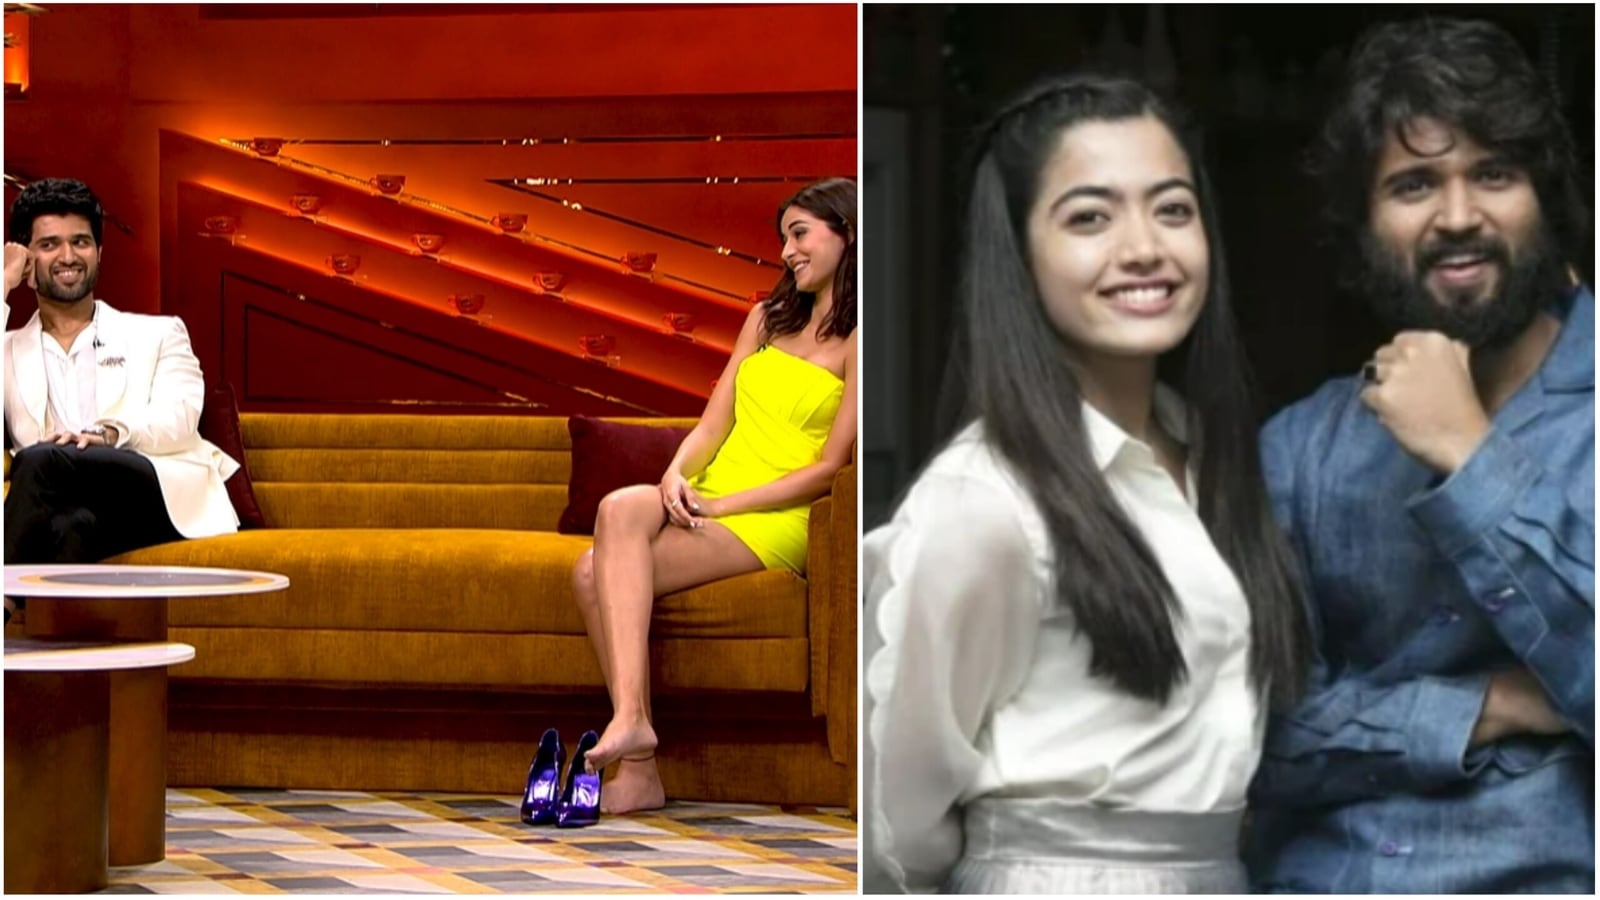 Explained: What Ananya Panday meant when she said Vijay Deverakonda is in ‘rush’ to meet Mika Singh